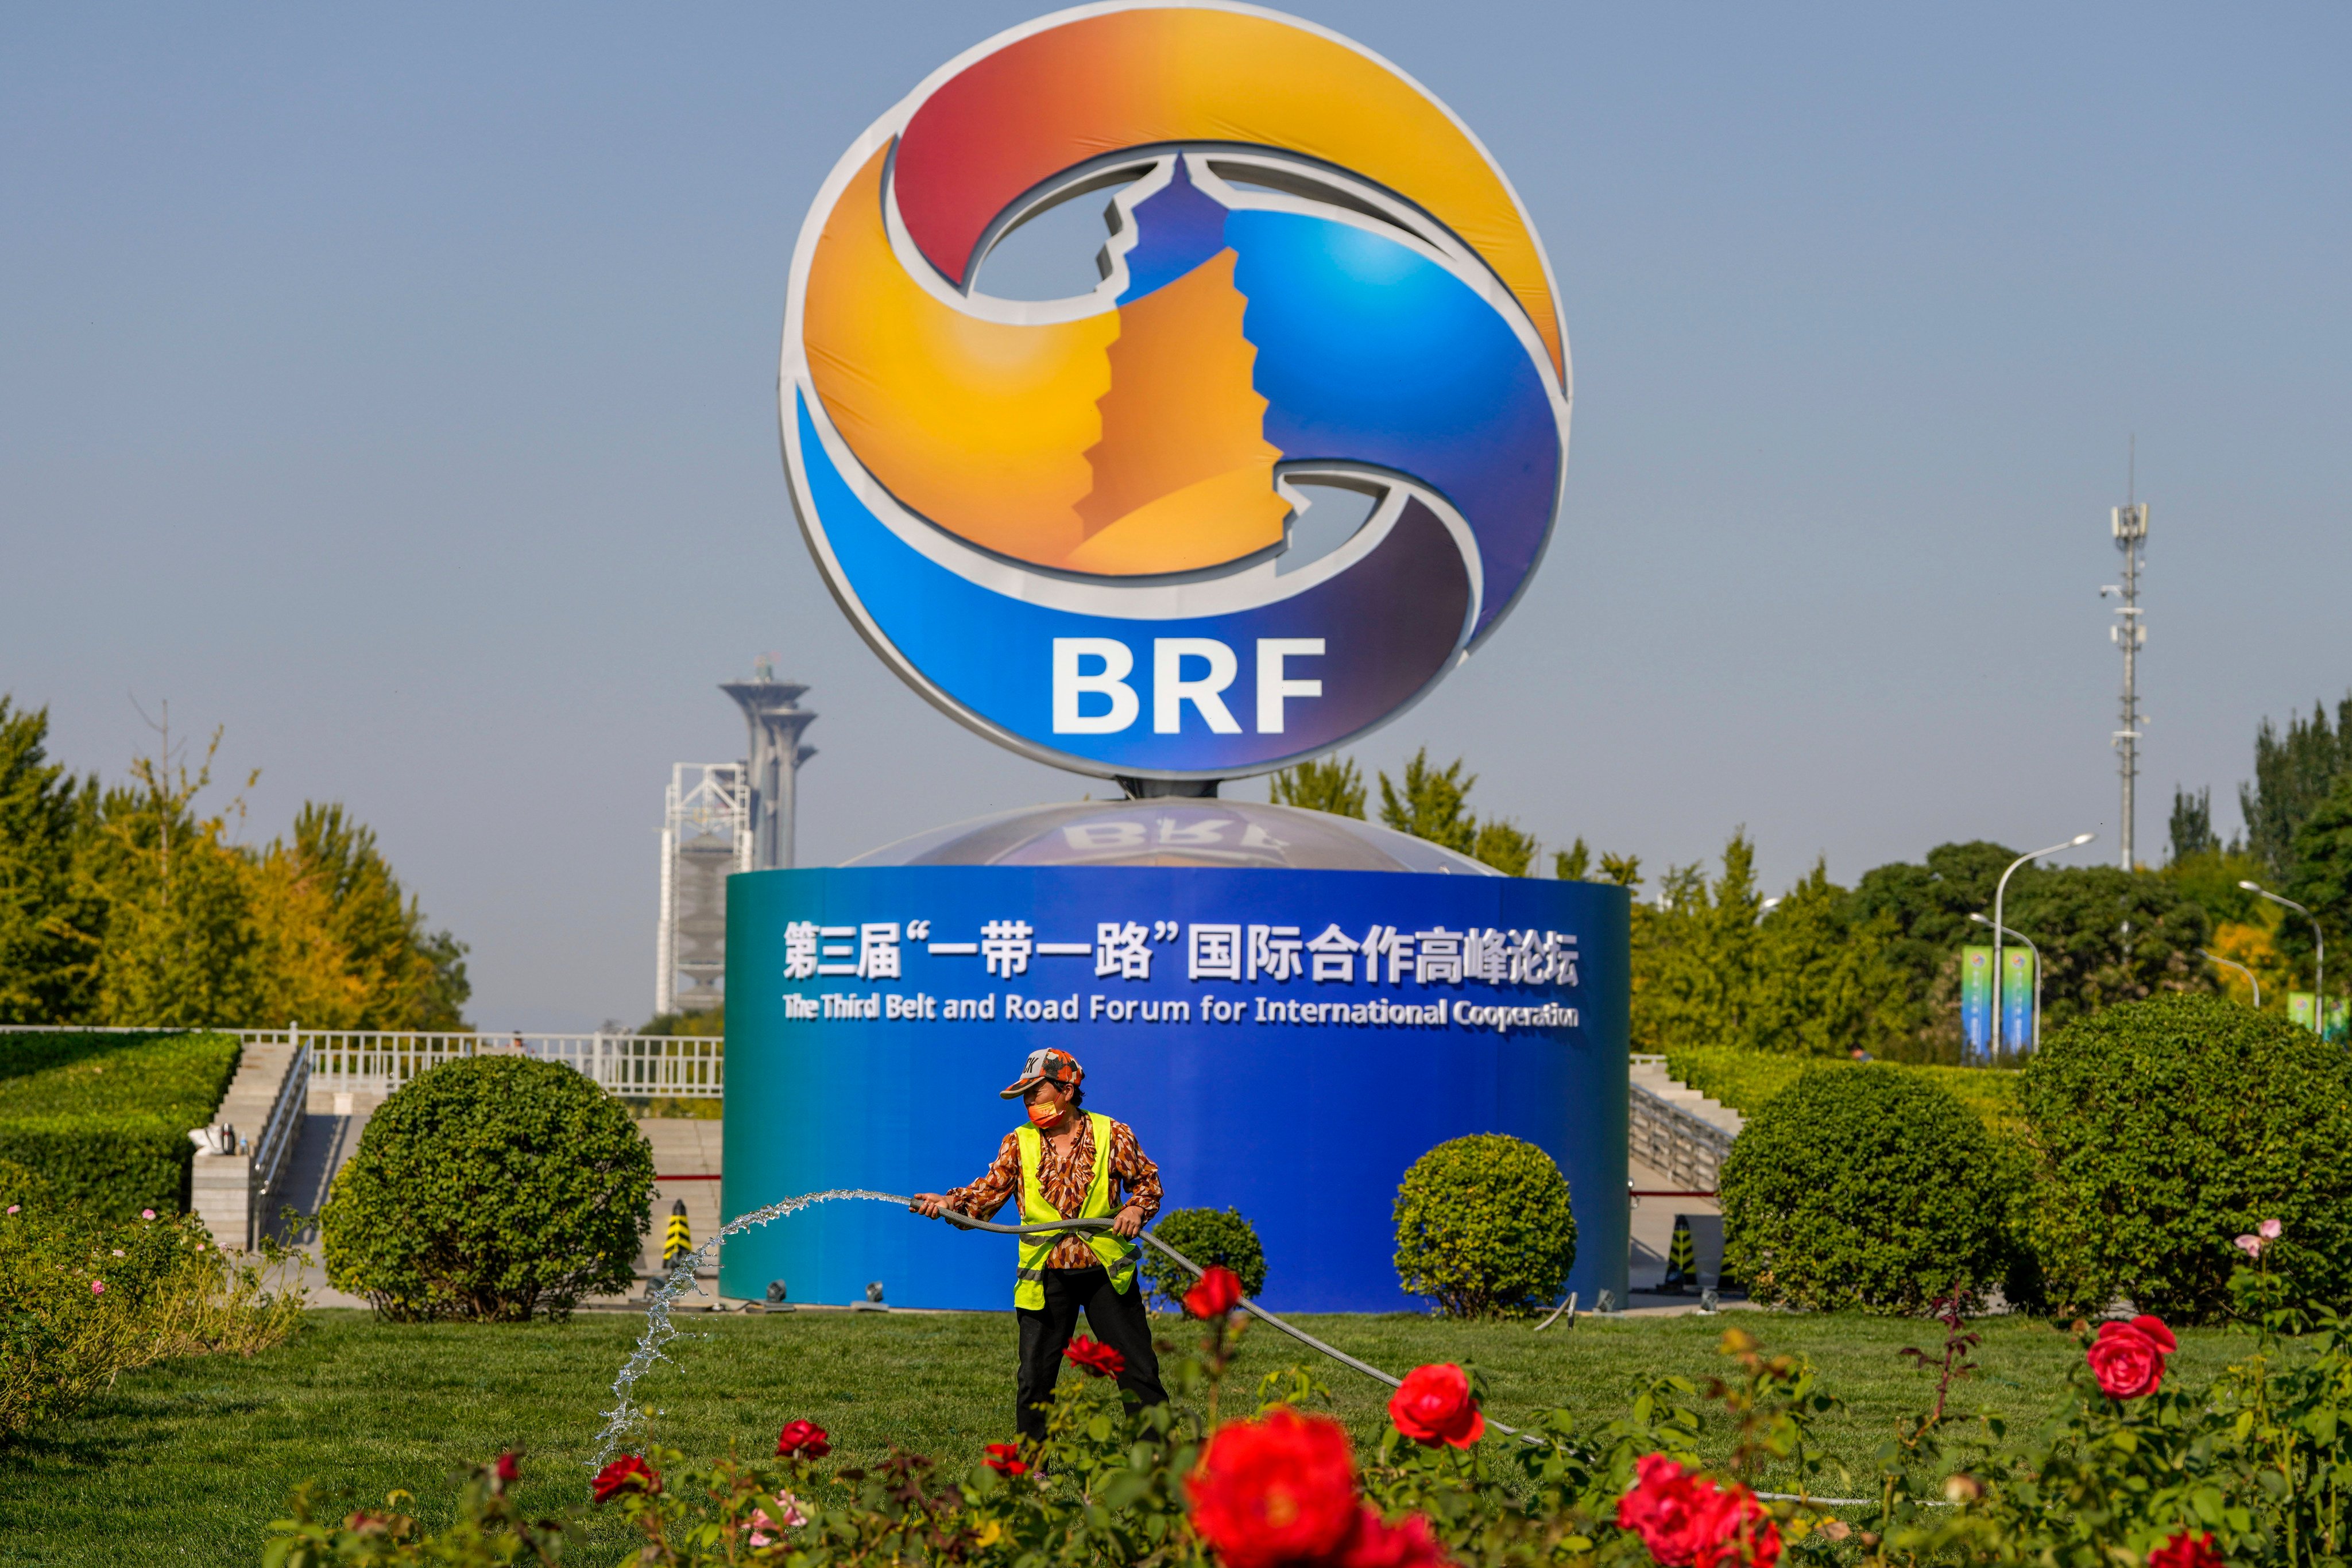 China prepares for the third Belt and Road Forum for International Cooperation, to be held in Beijing this week. Photo: AP